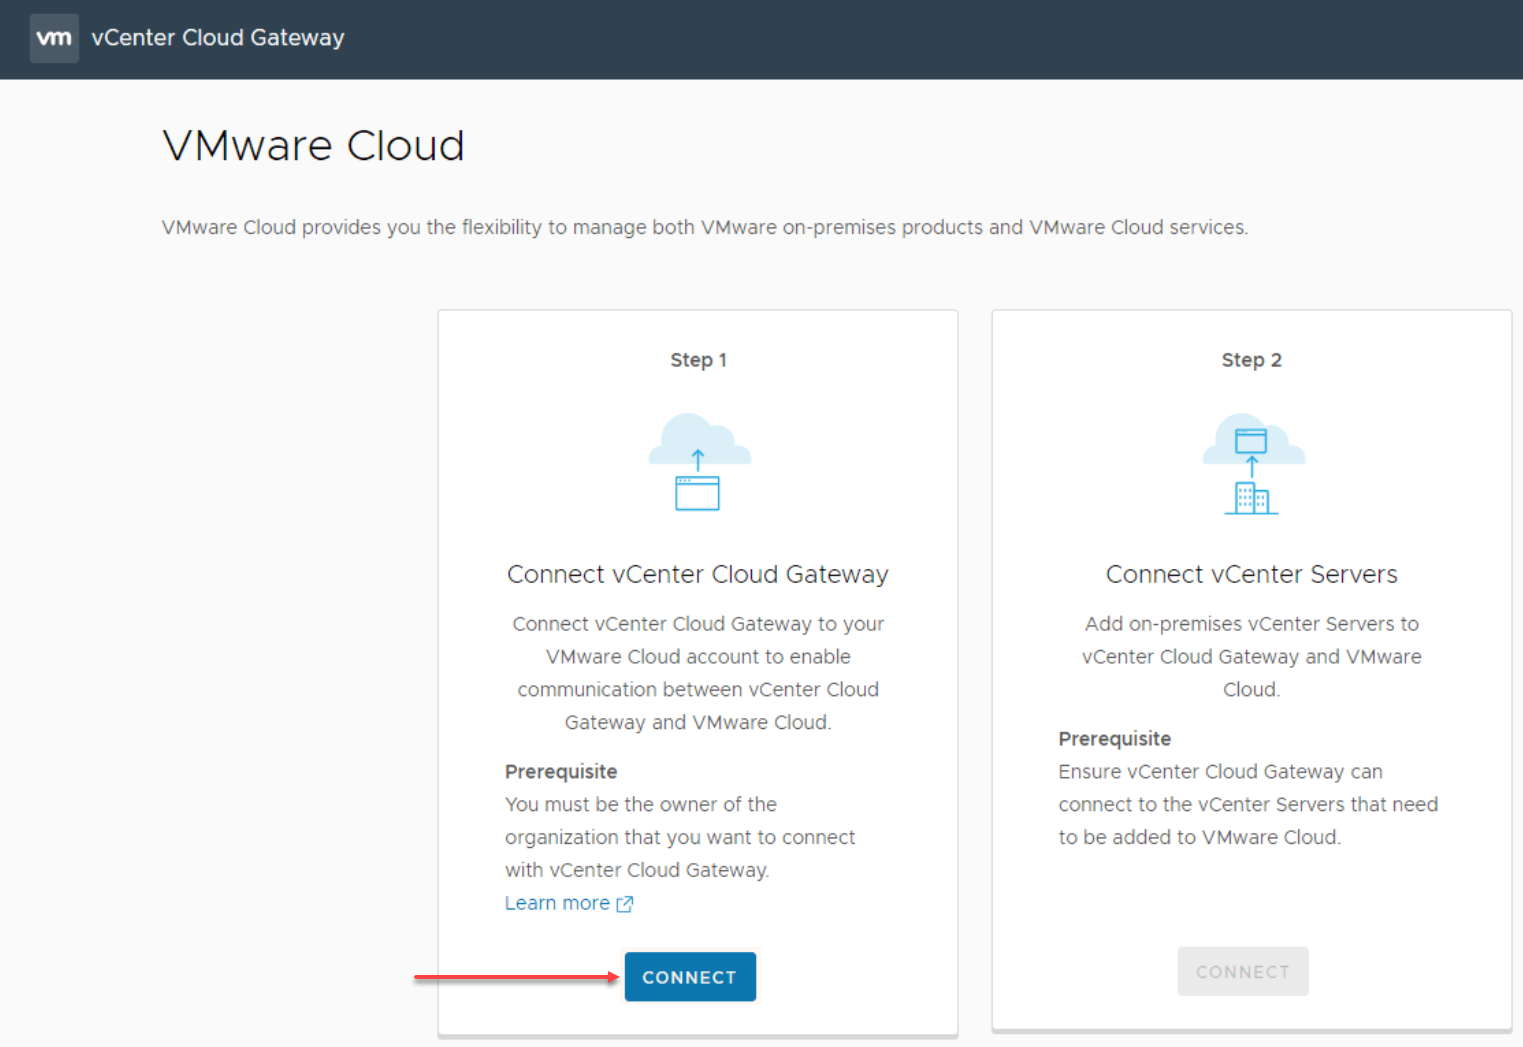 Connect vCenter Cloud Gateway to your VMware Cloud account